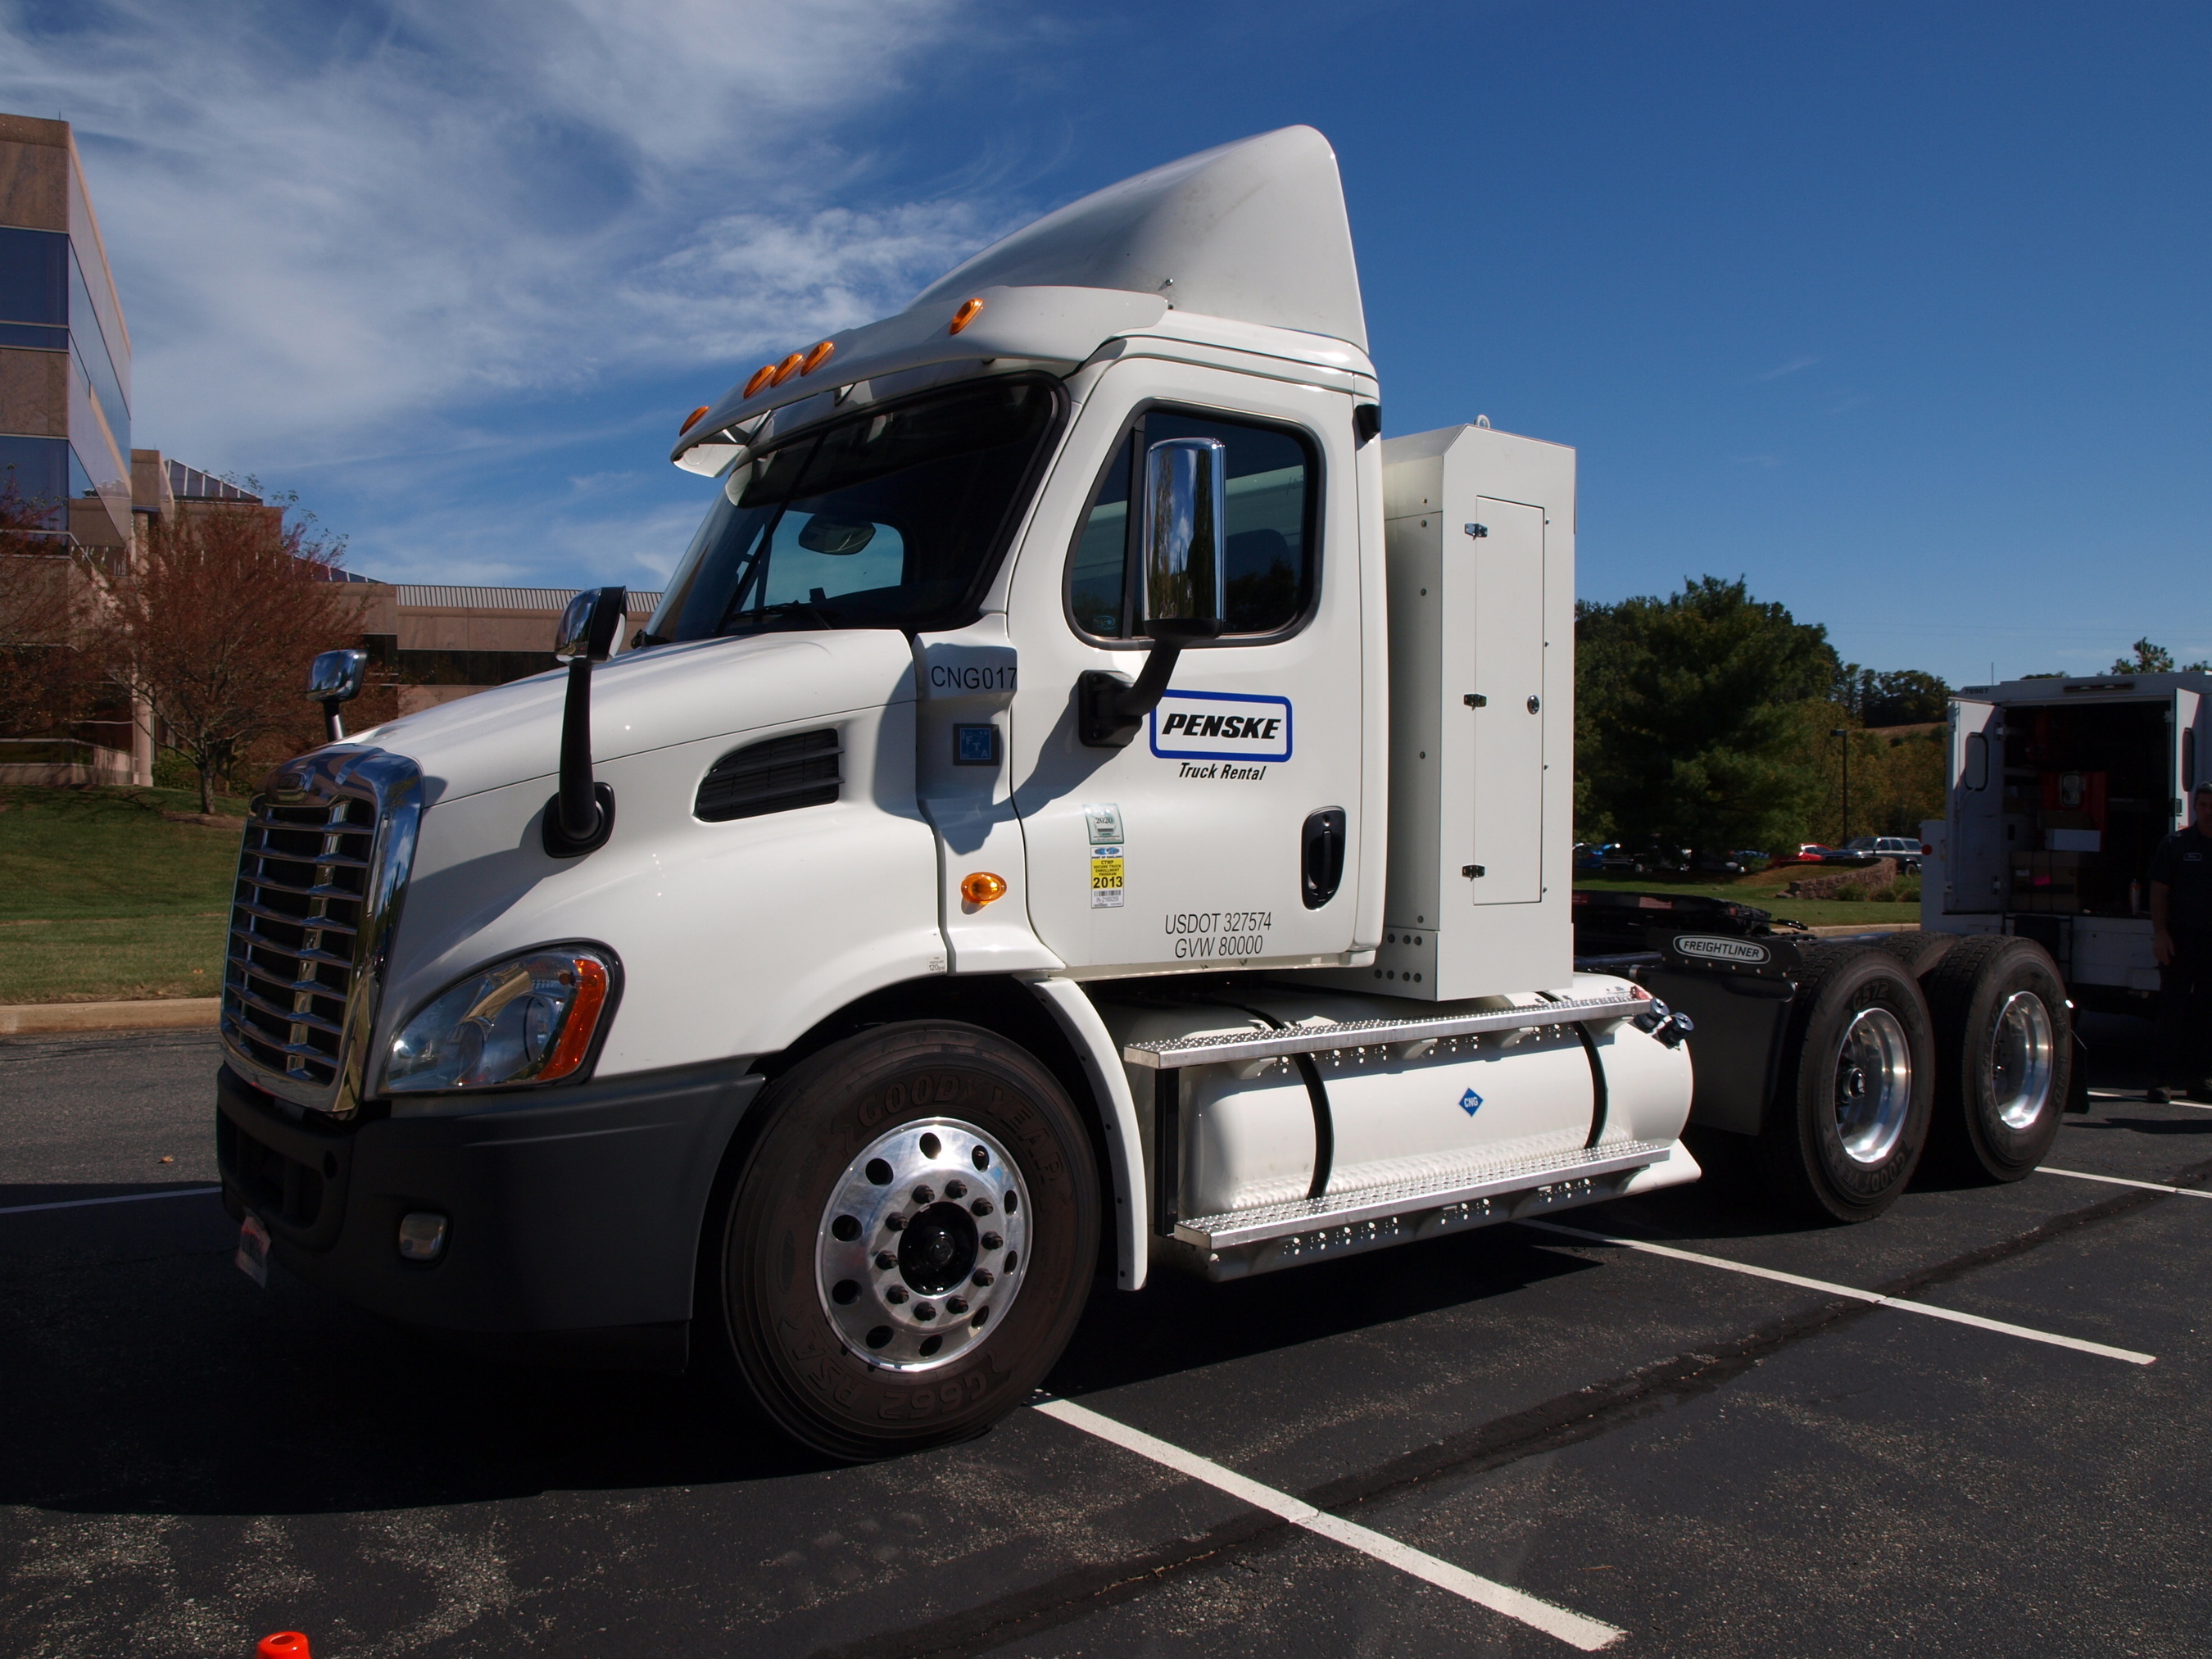 Penske will serve as both an exhibitor and thought leader at the 2014 Alternative Clean Transportation (ACT) Expo in Long Beach, Calif.  (PRNewsFoto/Penske Truck Leasing)